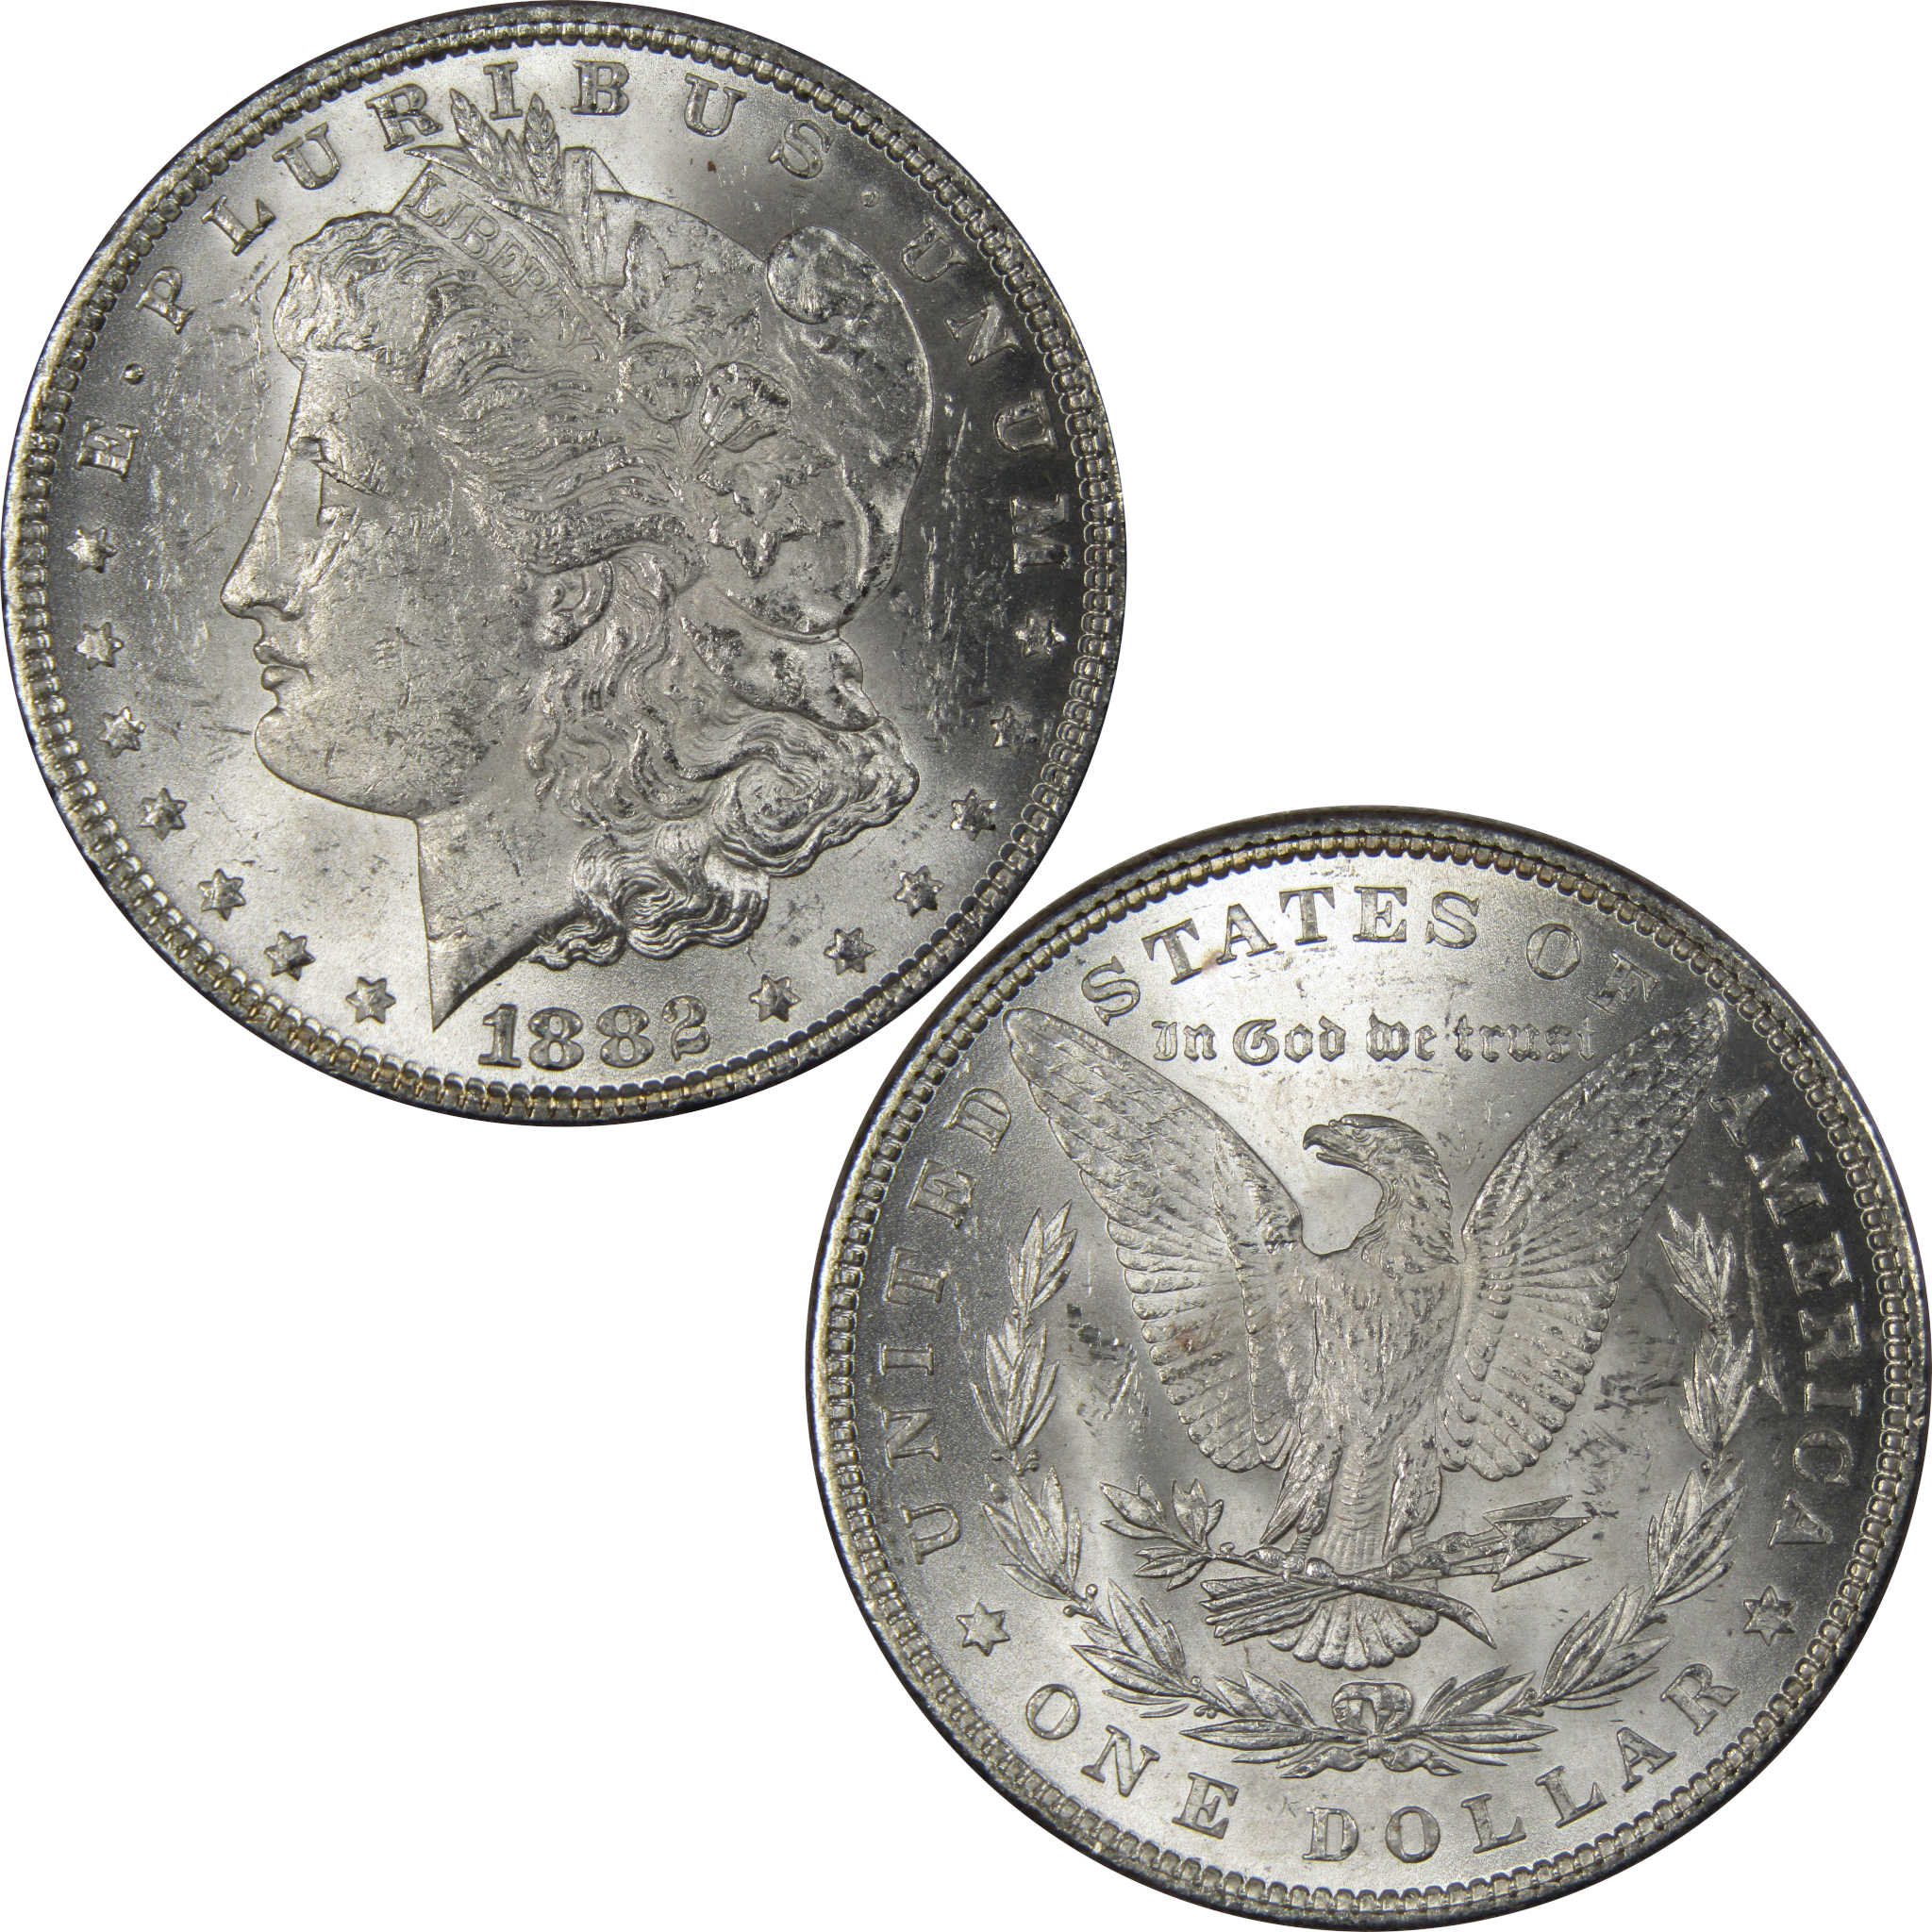 1882 Morgan Dollar BU Uncirculated Mint State 90% Silver SKU:IPC9674 - Morgan coin - Morgan silver dollar - Morgan silver dollar for sale - Profile Coins &amp; Collectibles